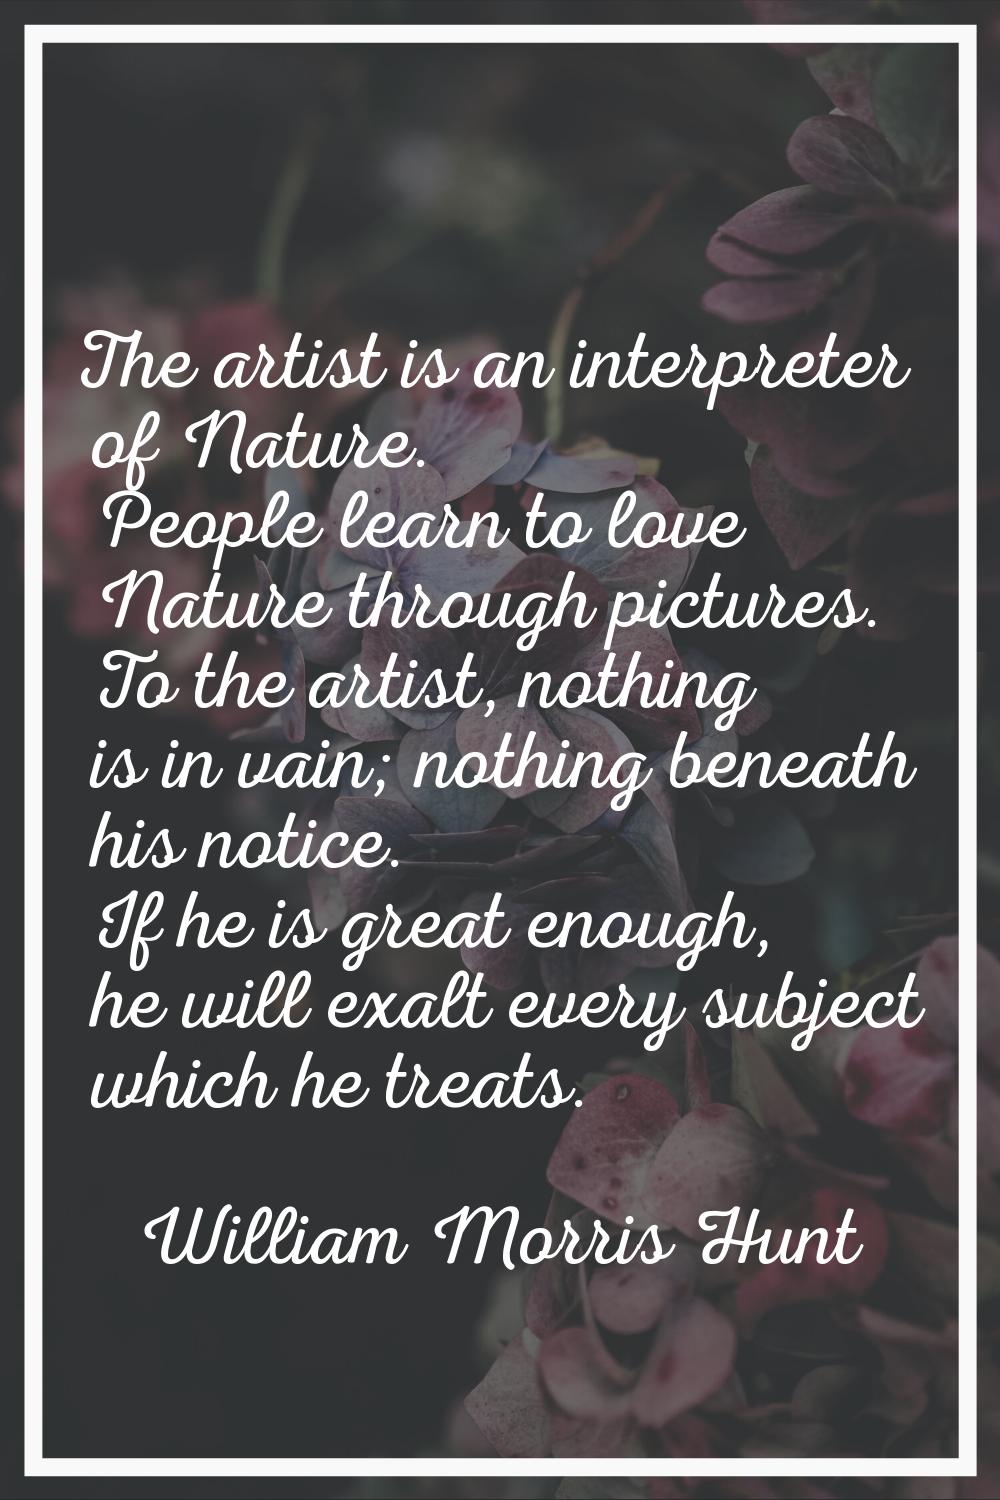 The artist is an interpreter of Nature. People learn to love Nature through pictures. To the artist